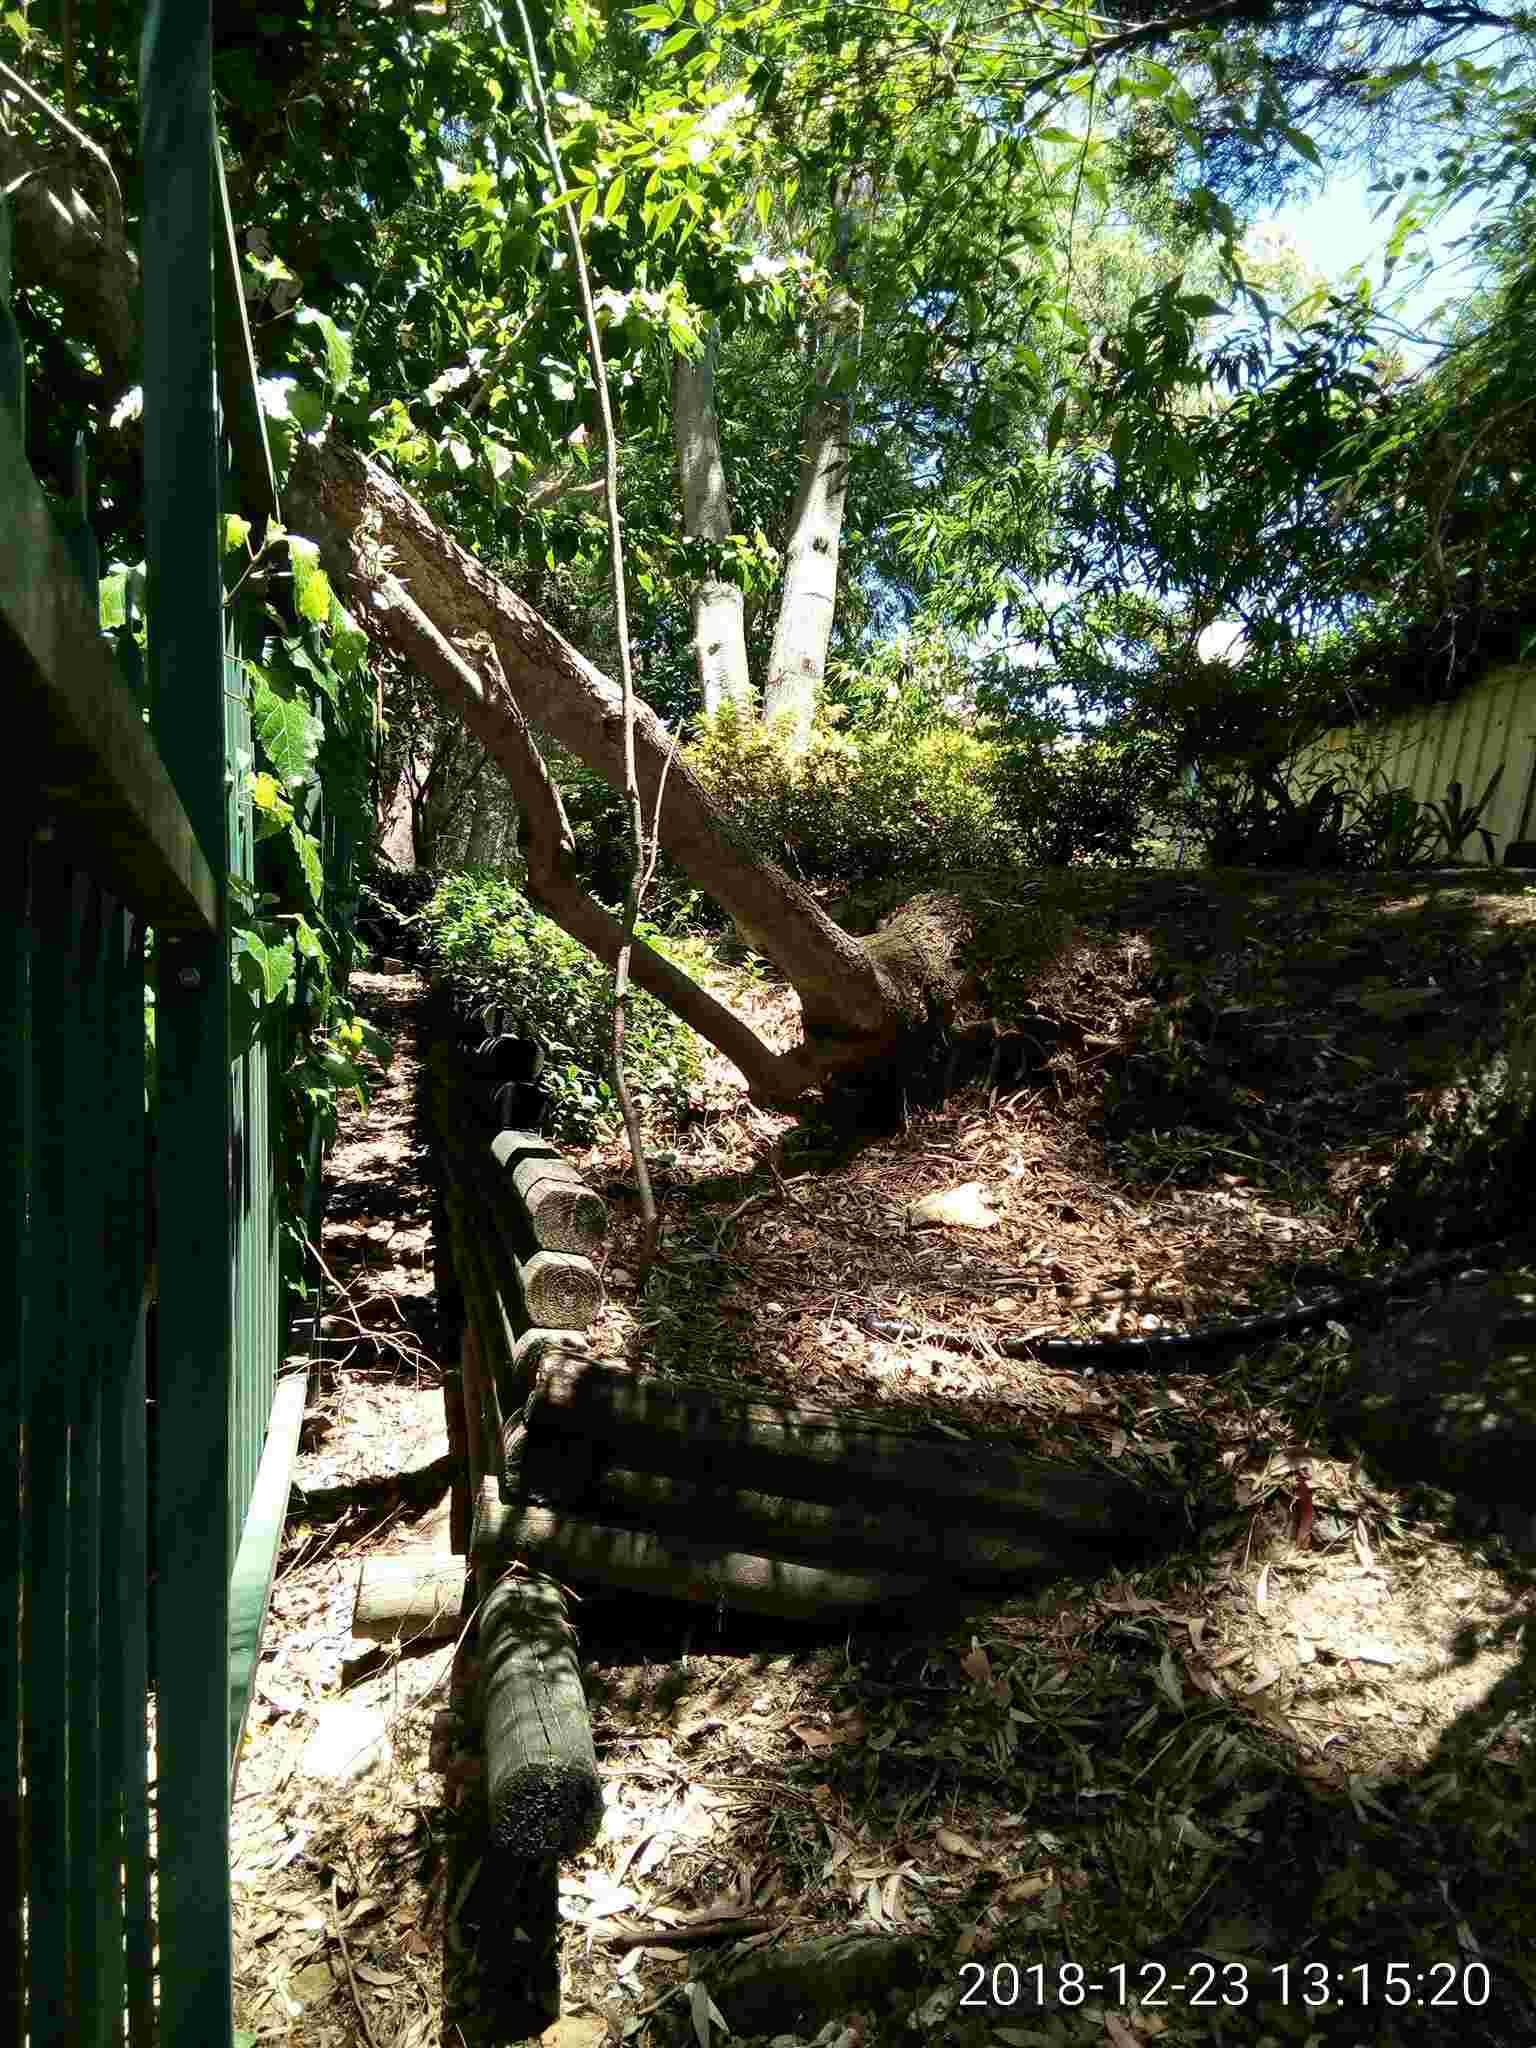 SP52948-neglected-damage-to-fence-due-to-uprooted-tree-that-might-cause-damage-to-property-outside-complex-photo-2-23Dec2018.jpg